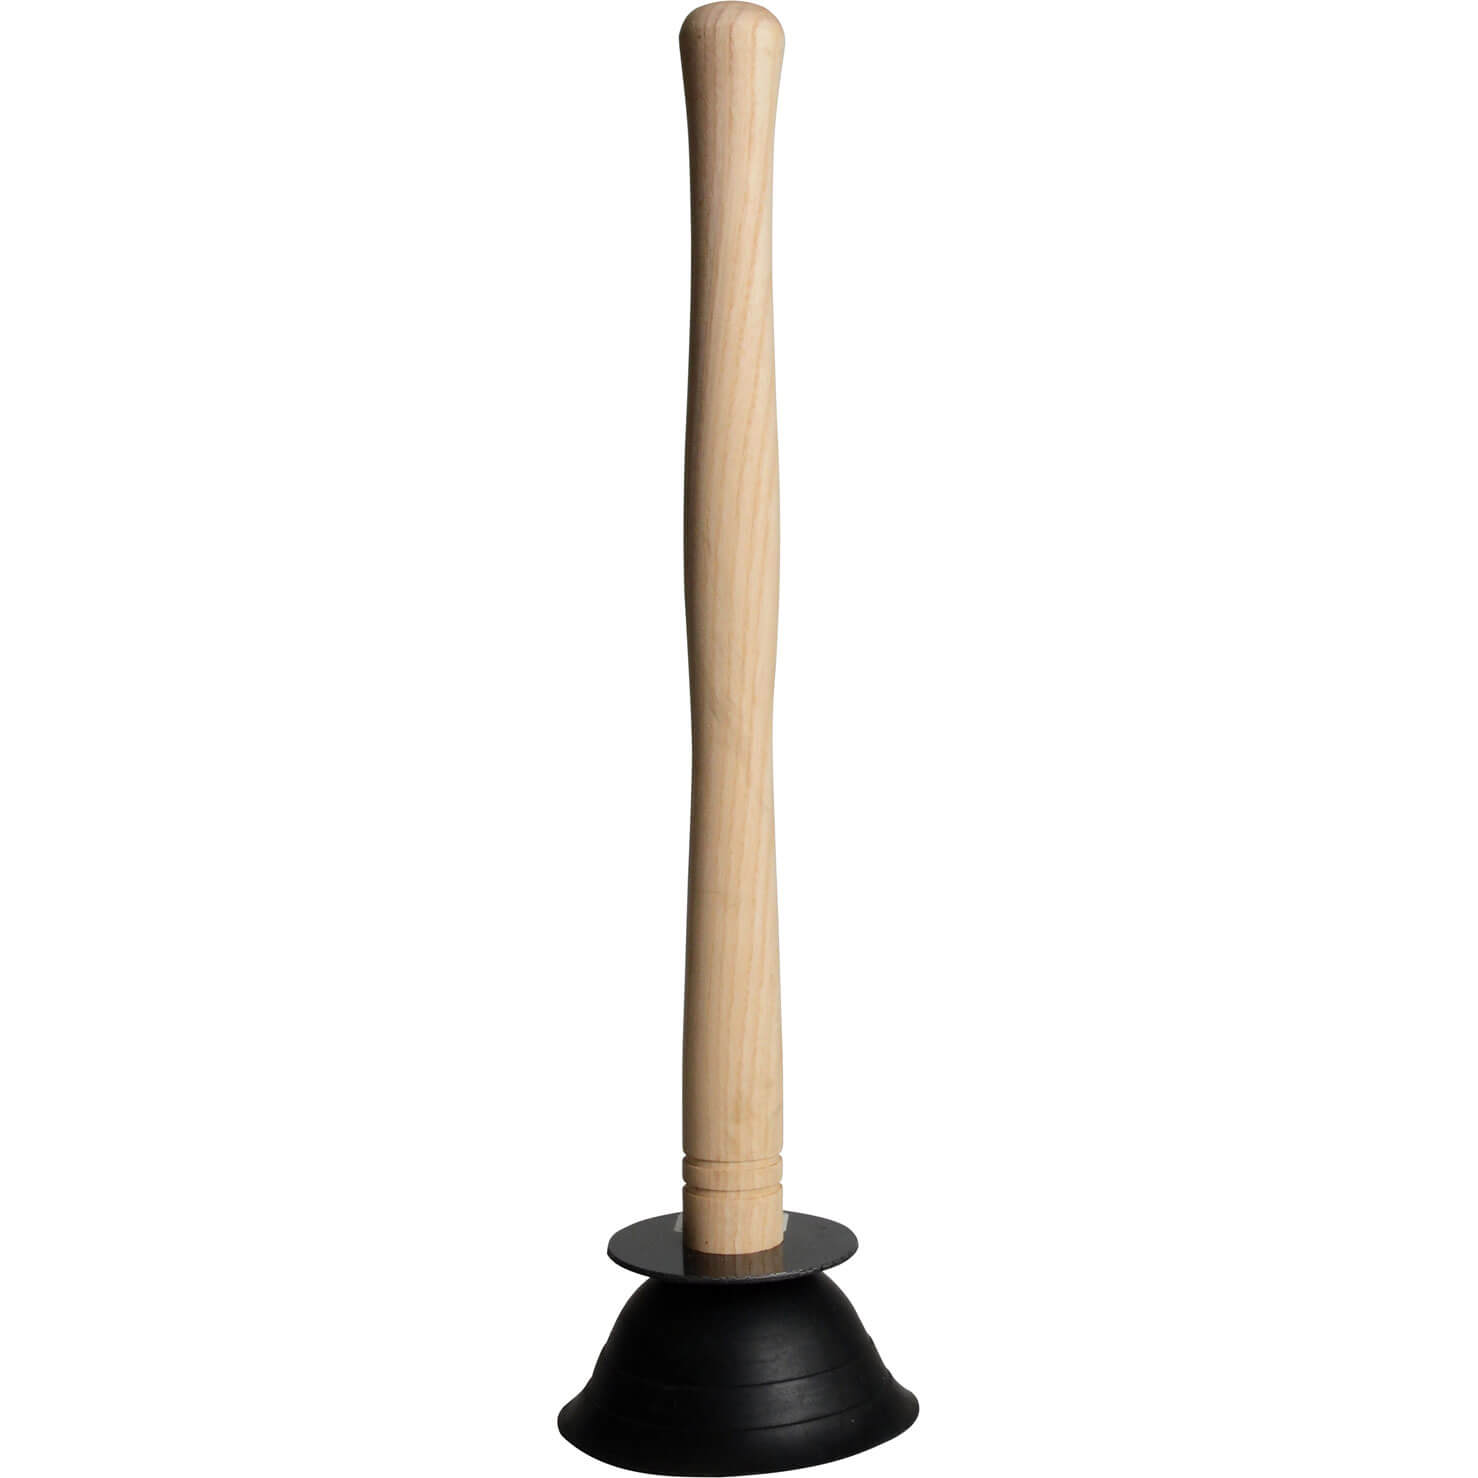 Image of Monument Force Sink Plunger 120mm